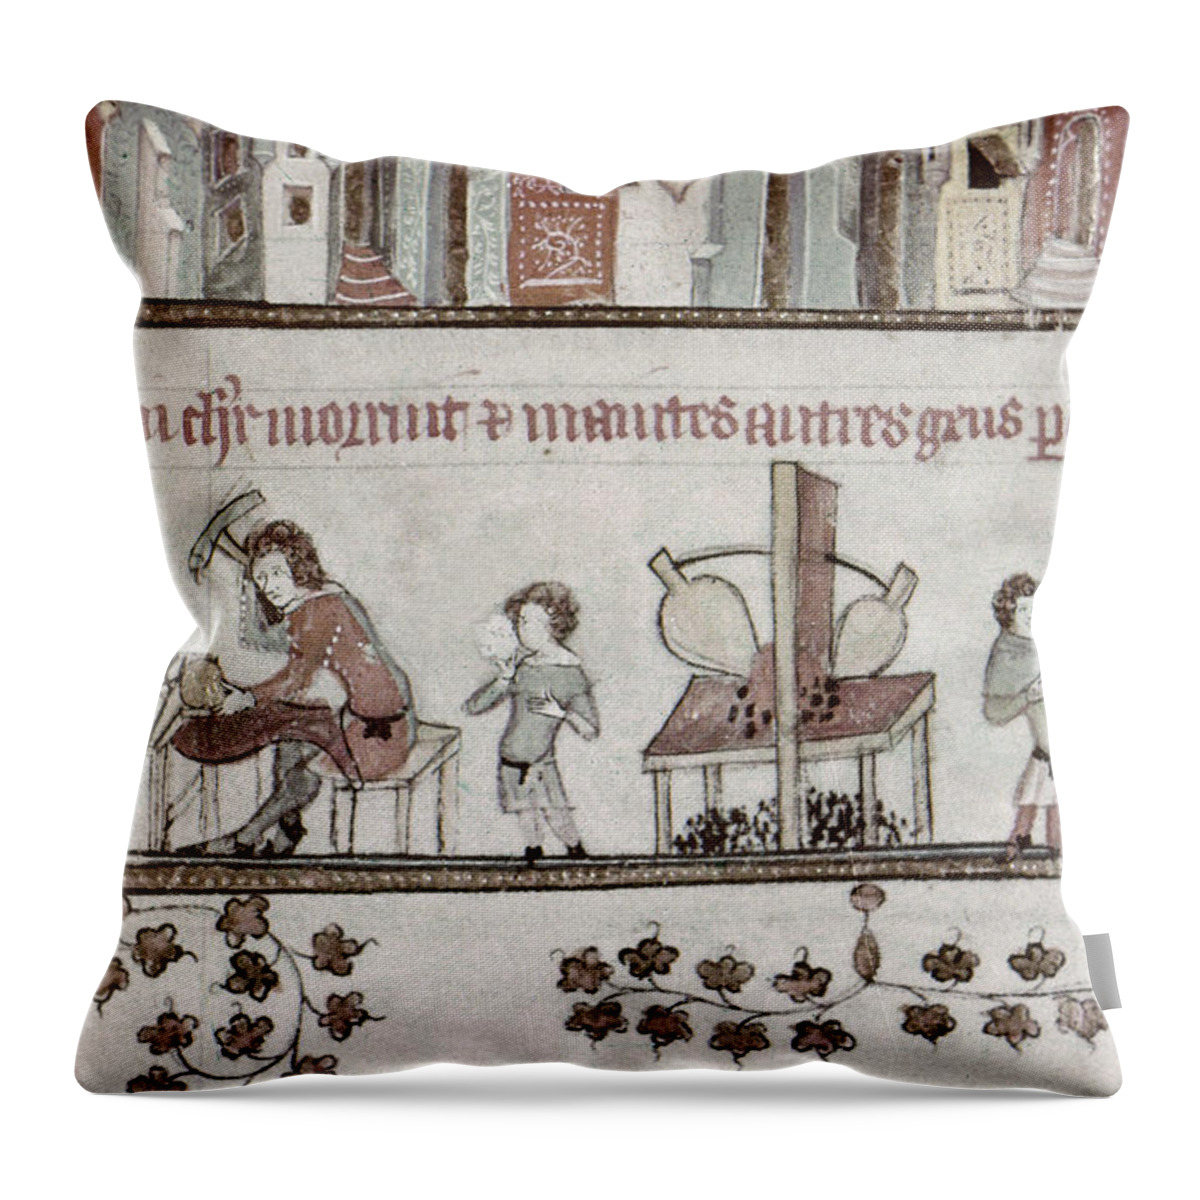 1340 Throw Pillow featuring the painting Metalworkers, 14th Century by Granger